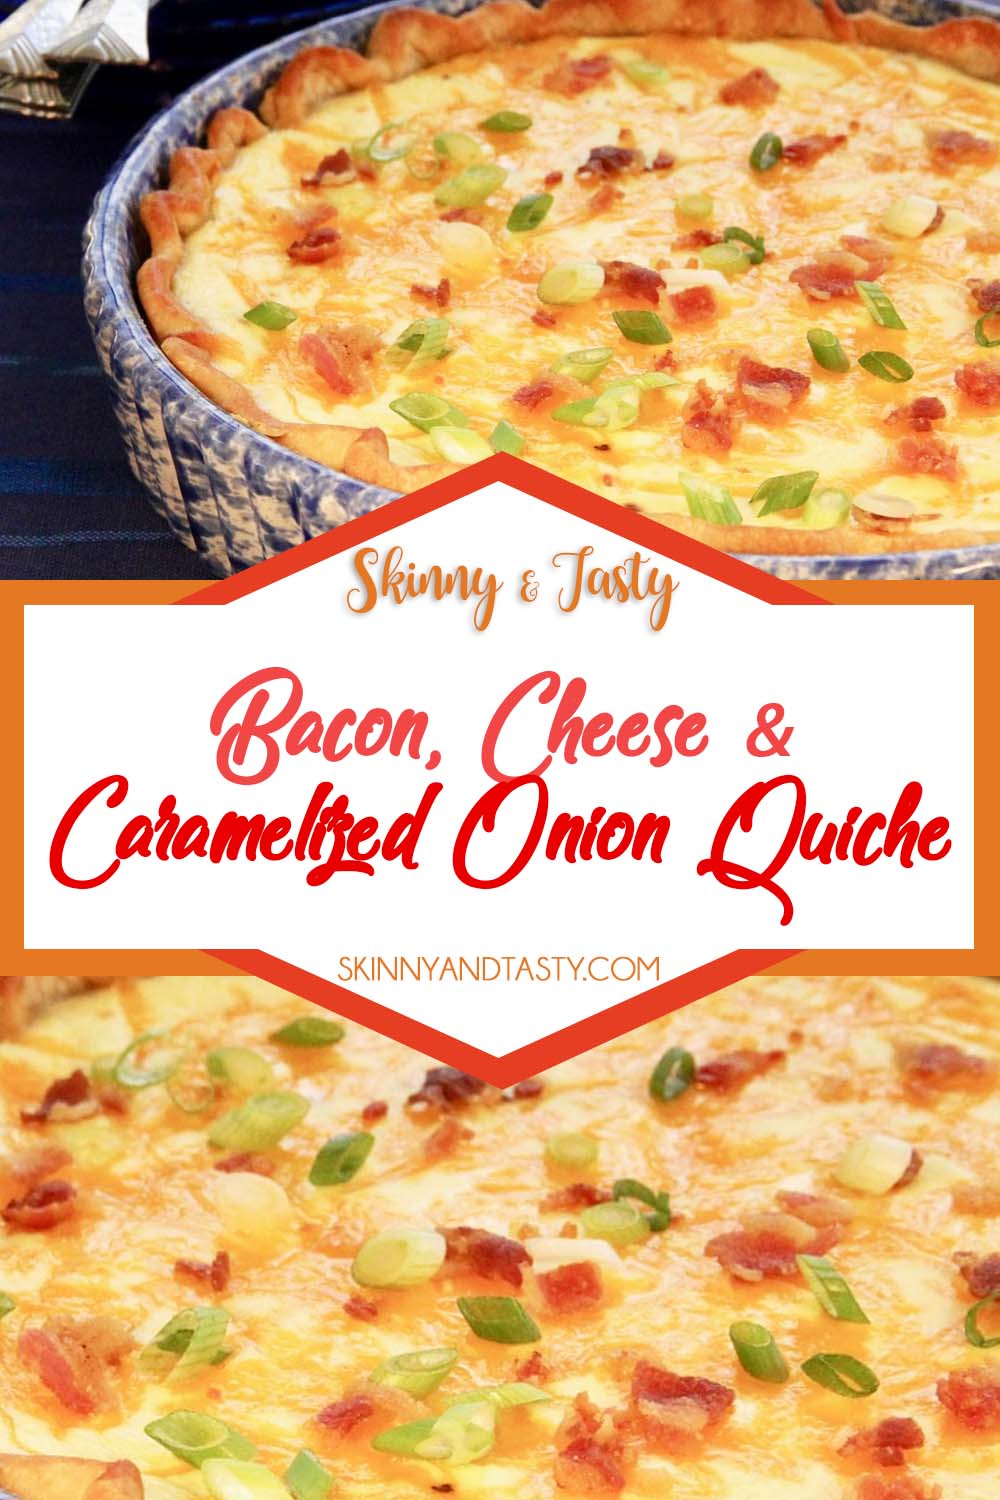 Bacon, Cheese, and Caramelized Onion Quiche